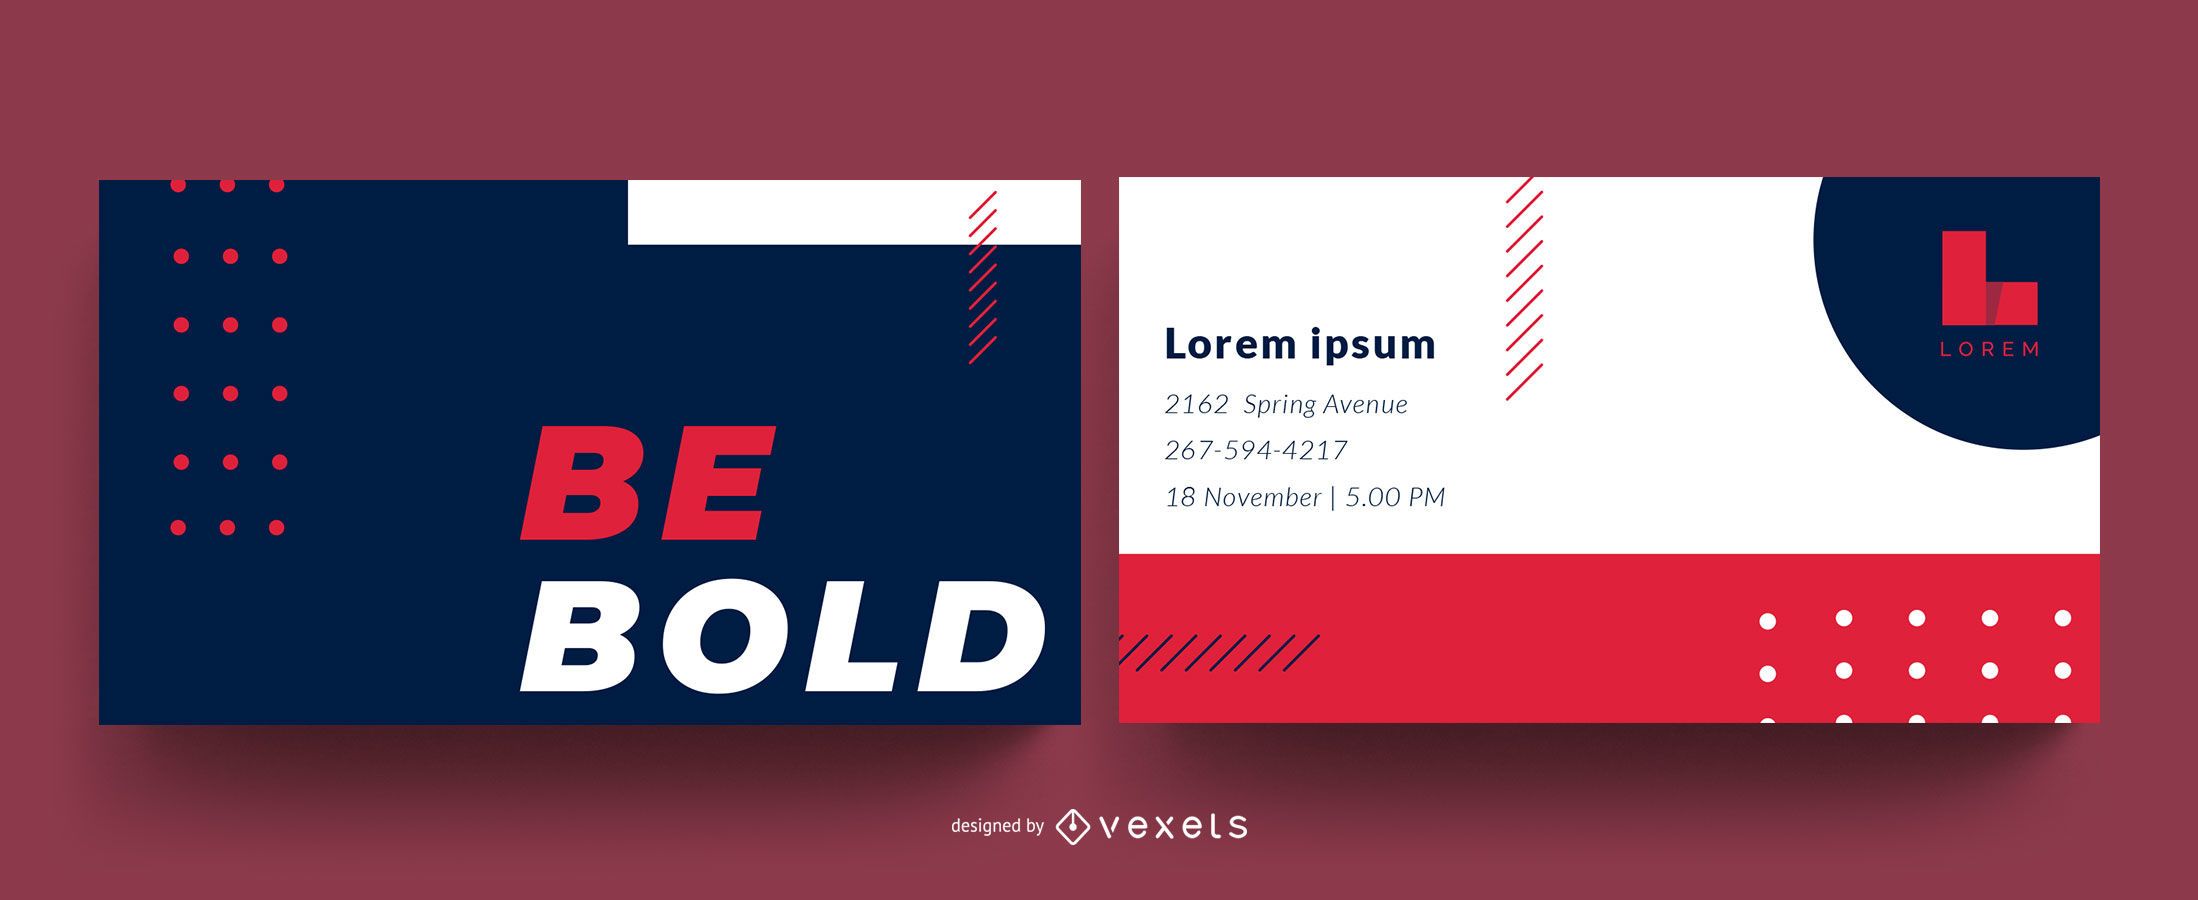 bold business cards 6